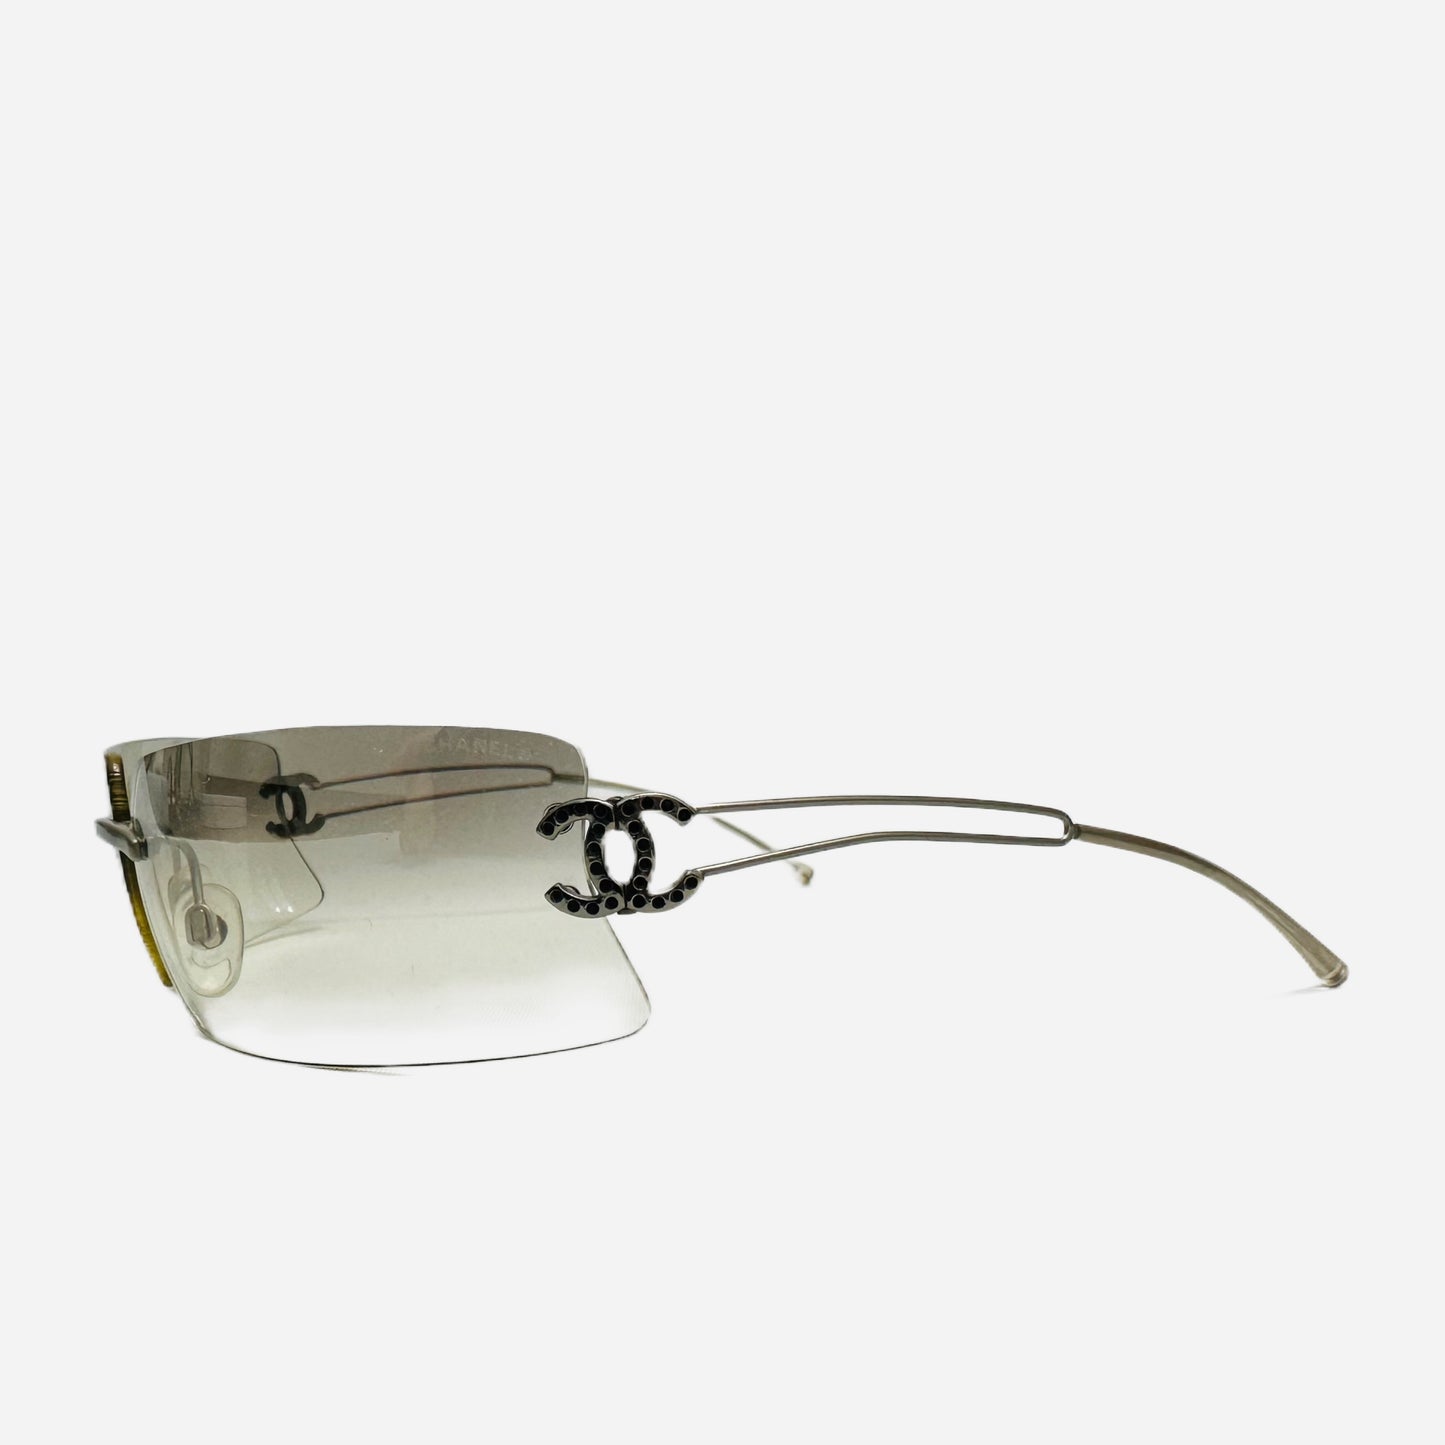 The-Seekers-Vintage-Coco-Chanel-Sunglasses-Sonnenbrille-4051-front